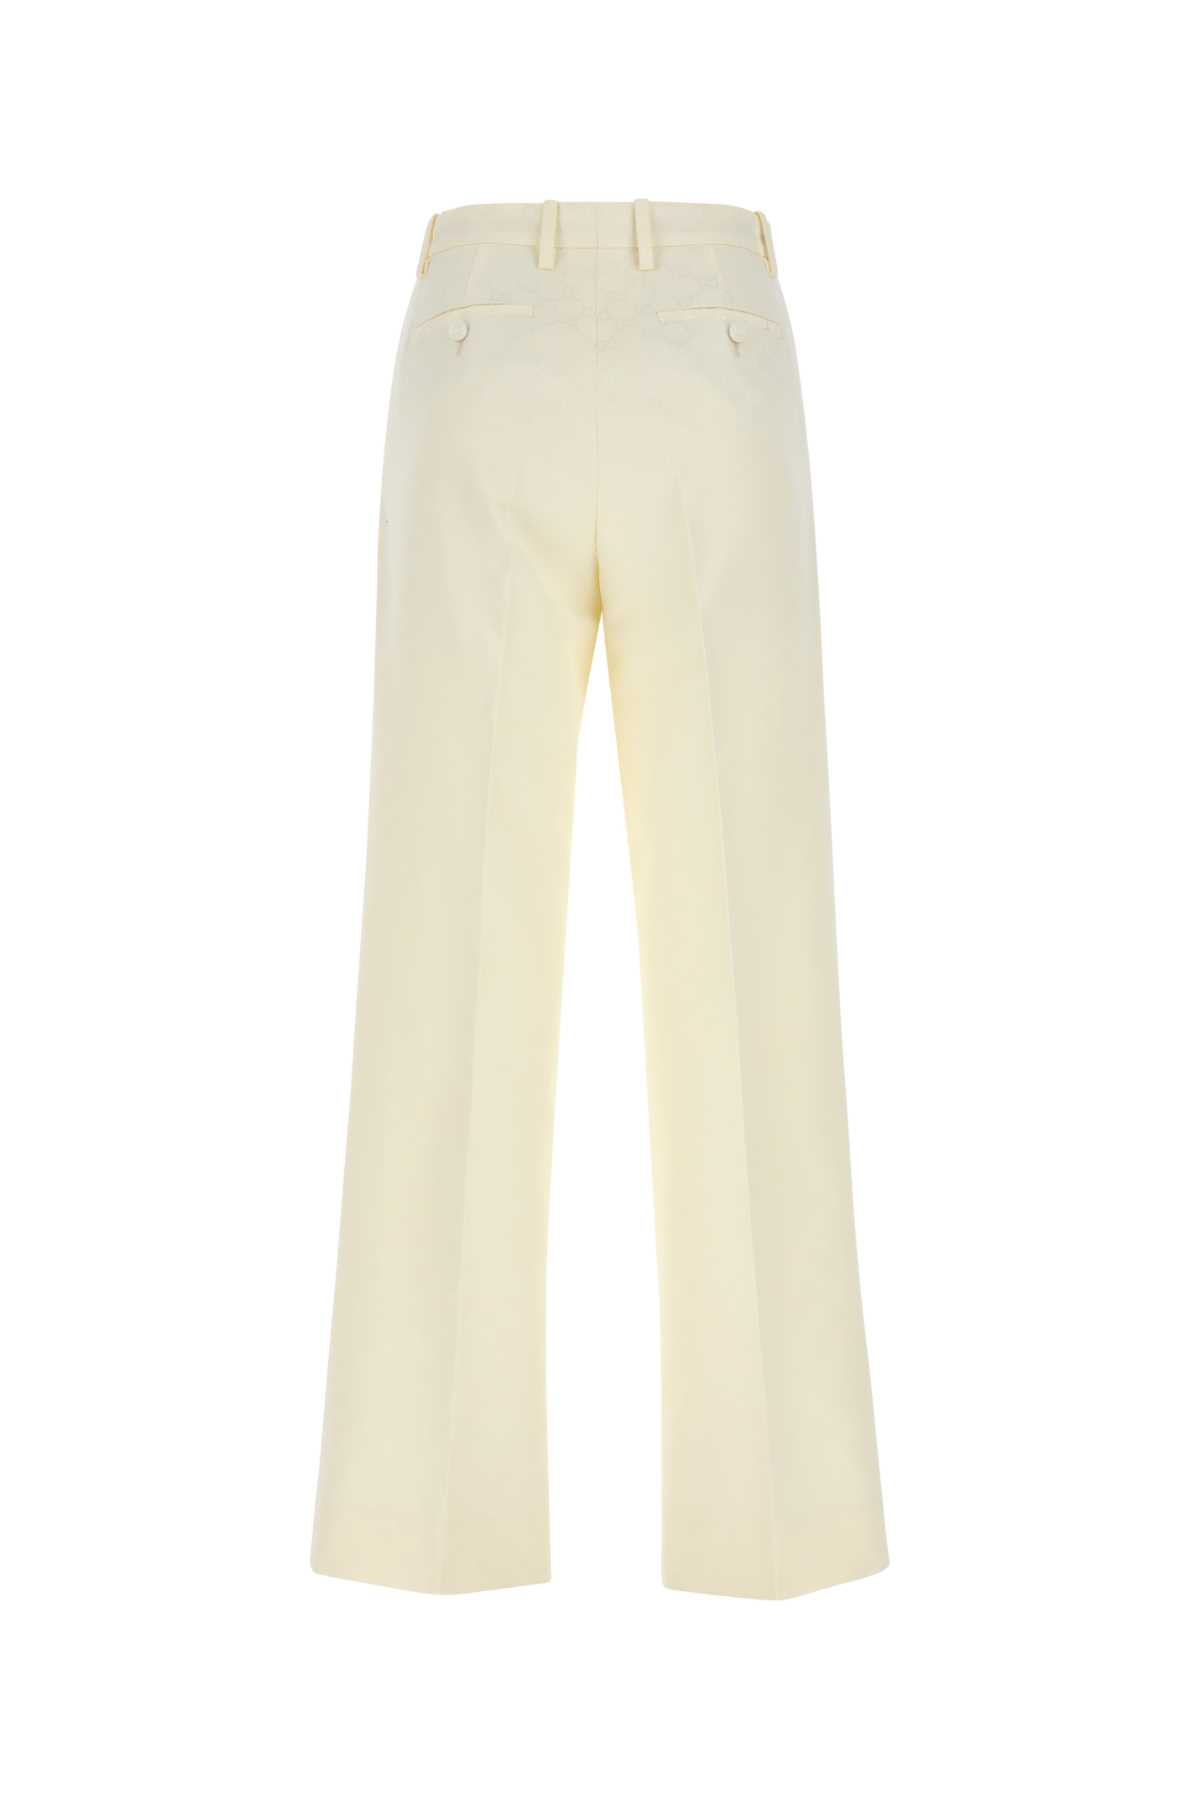 Gucci Embroidered Cotton Blend Wide-leg Pant In Beige